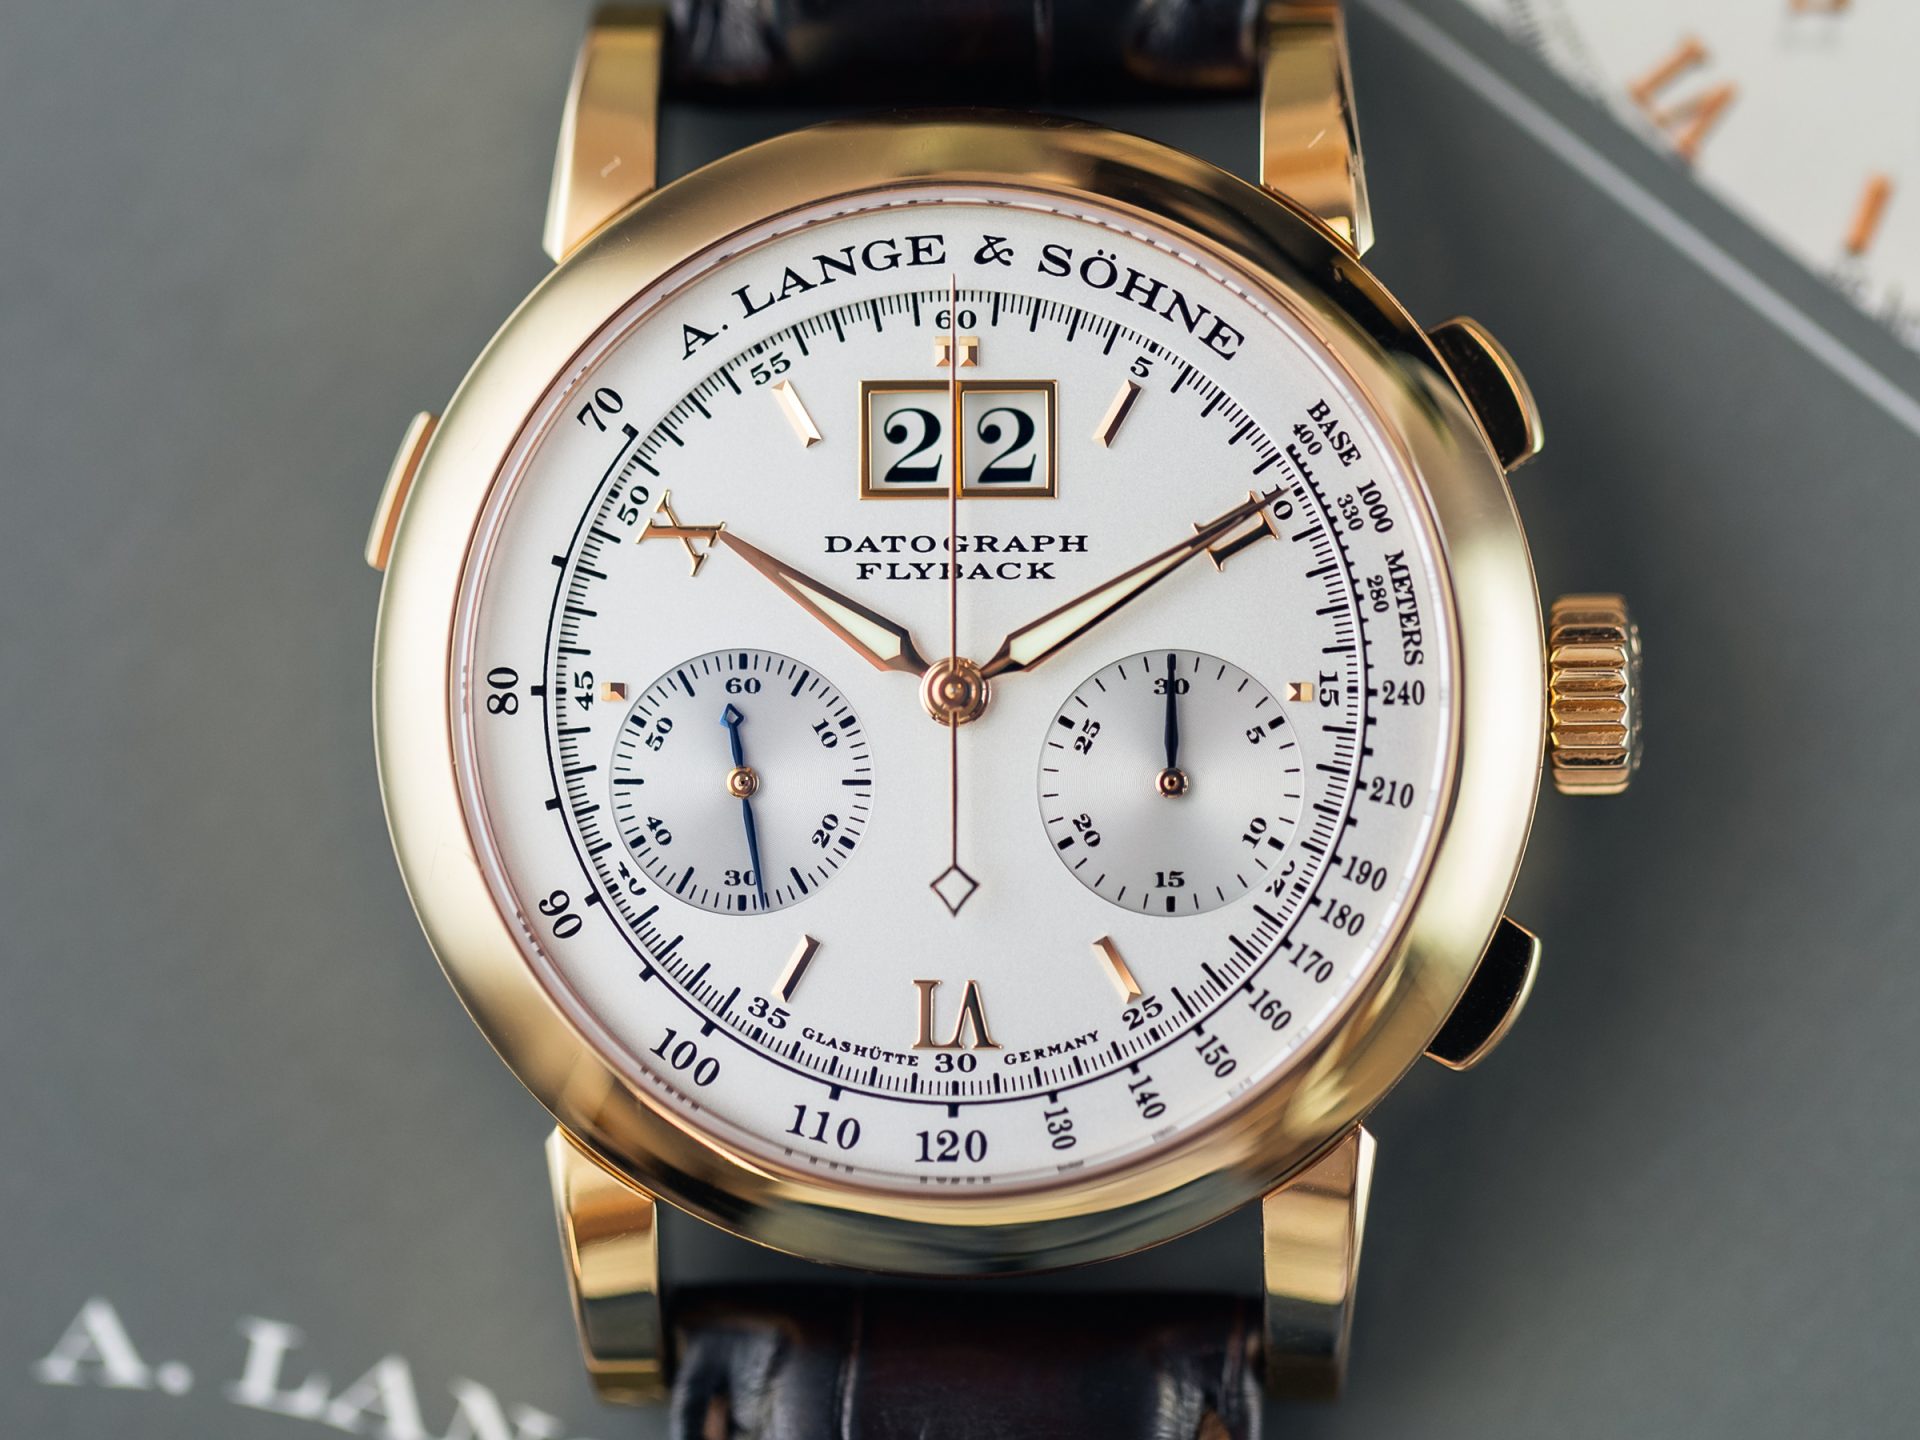 A. Lange & Söhne Exhibition Opening In Phillips Perpetual Mayfair Showroom